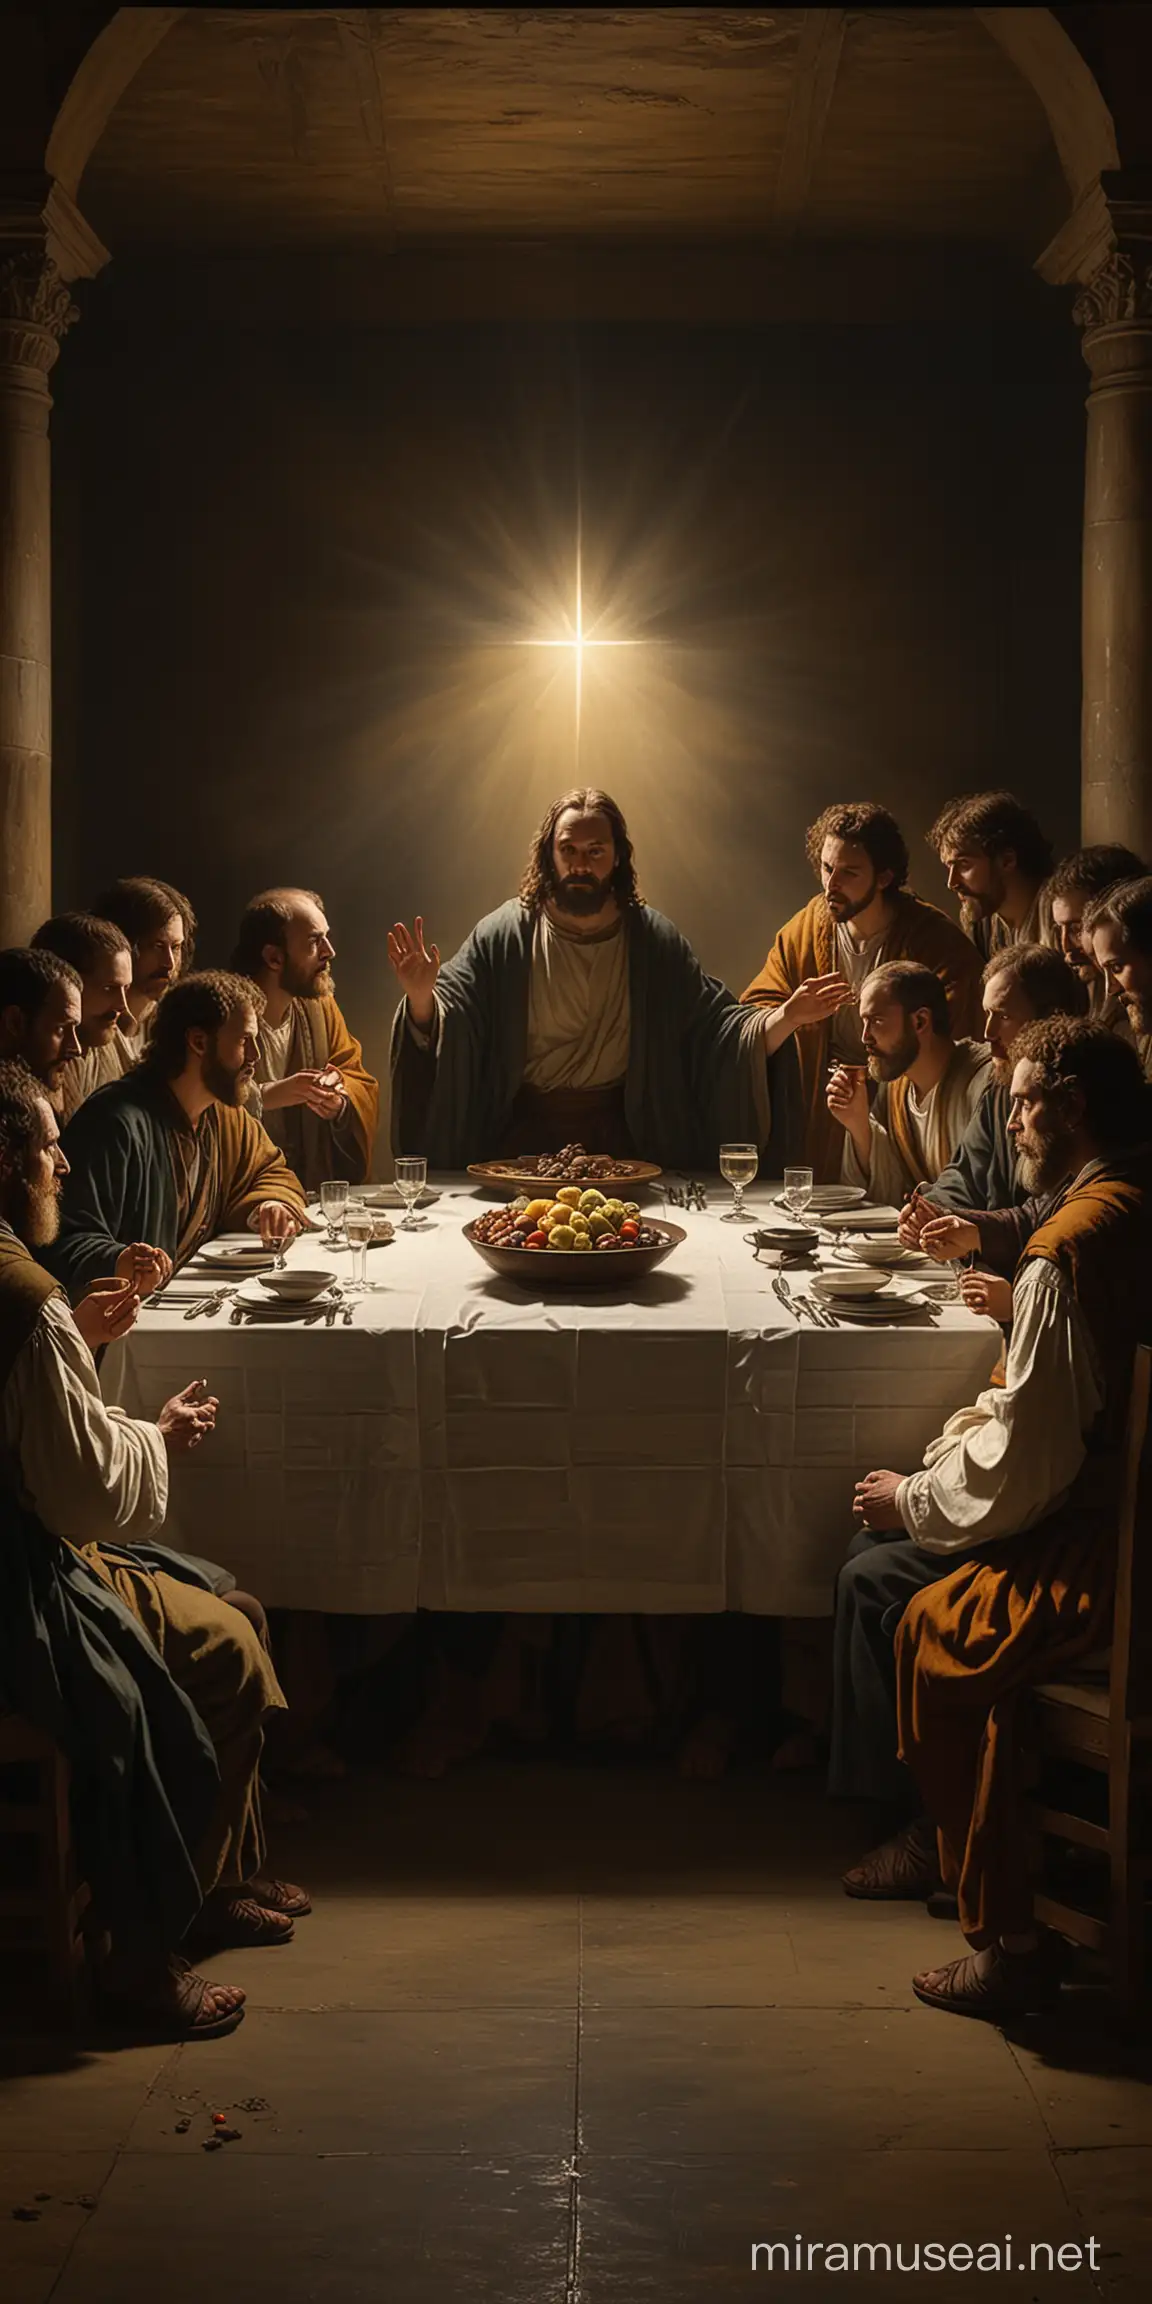 painting that will show  the last supper with the twelve apostles in a Rembrandt style, Dramatic use of light and shadow, a technique known as chiaroscuro, This creates a striking contrast between light and dark areas, often highlighting the focal point of the painting, His compositions often convey deep emotional or narrative intensity, Rembrandt's color palette is typically rich but subdued, featuring earthy tones and warm colors, His brushwork is renowned for its expressiveness and texture, ranging from smooth and finely detailed in areas of focus to more loose and impressionistic in other parts,